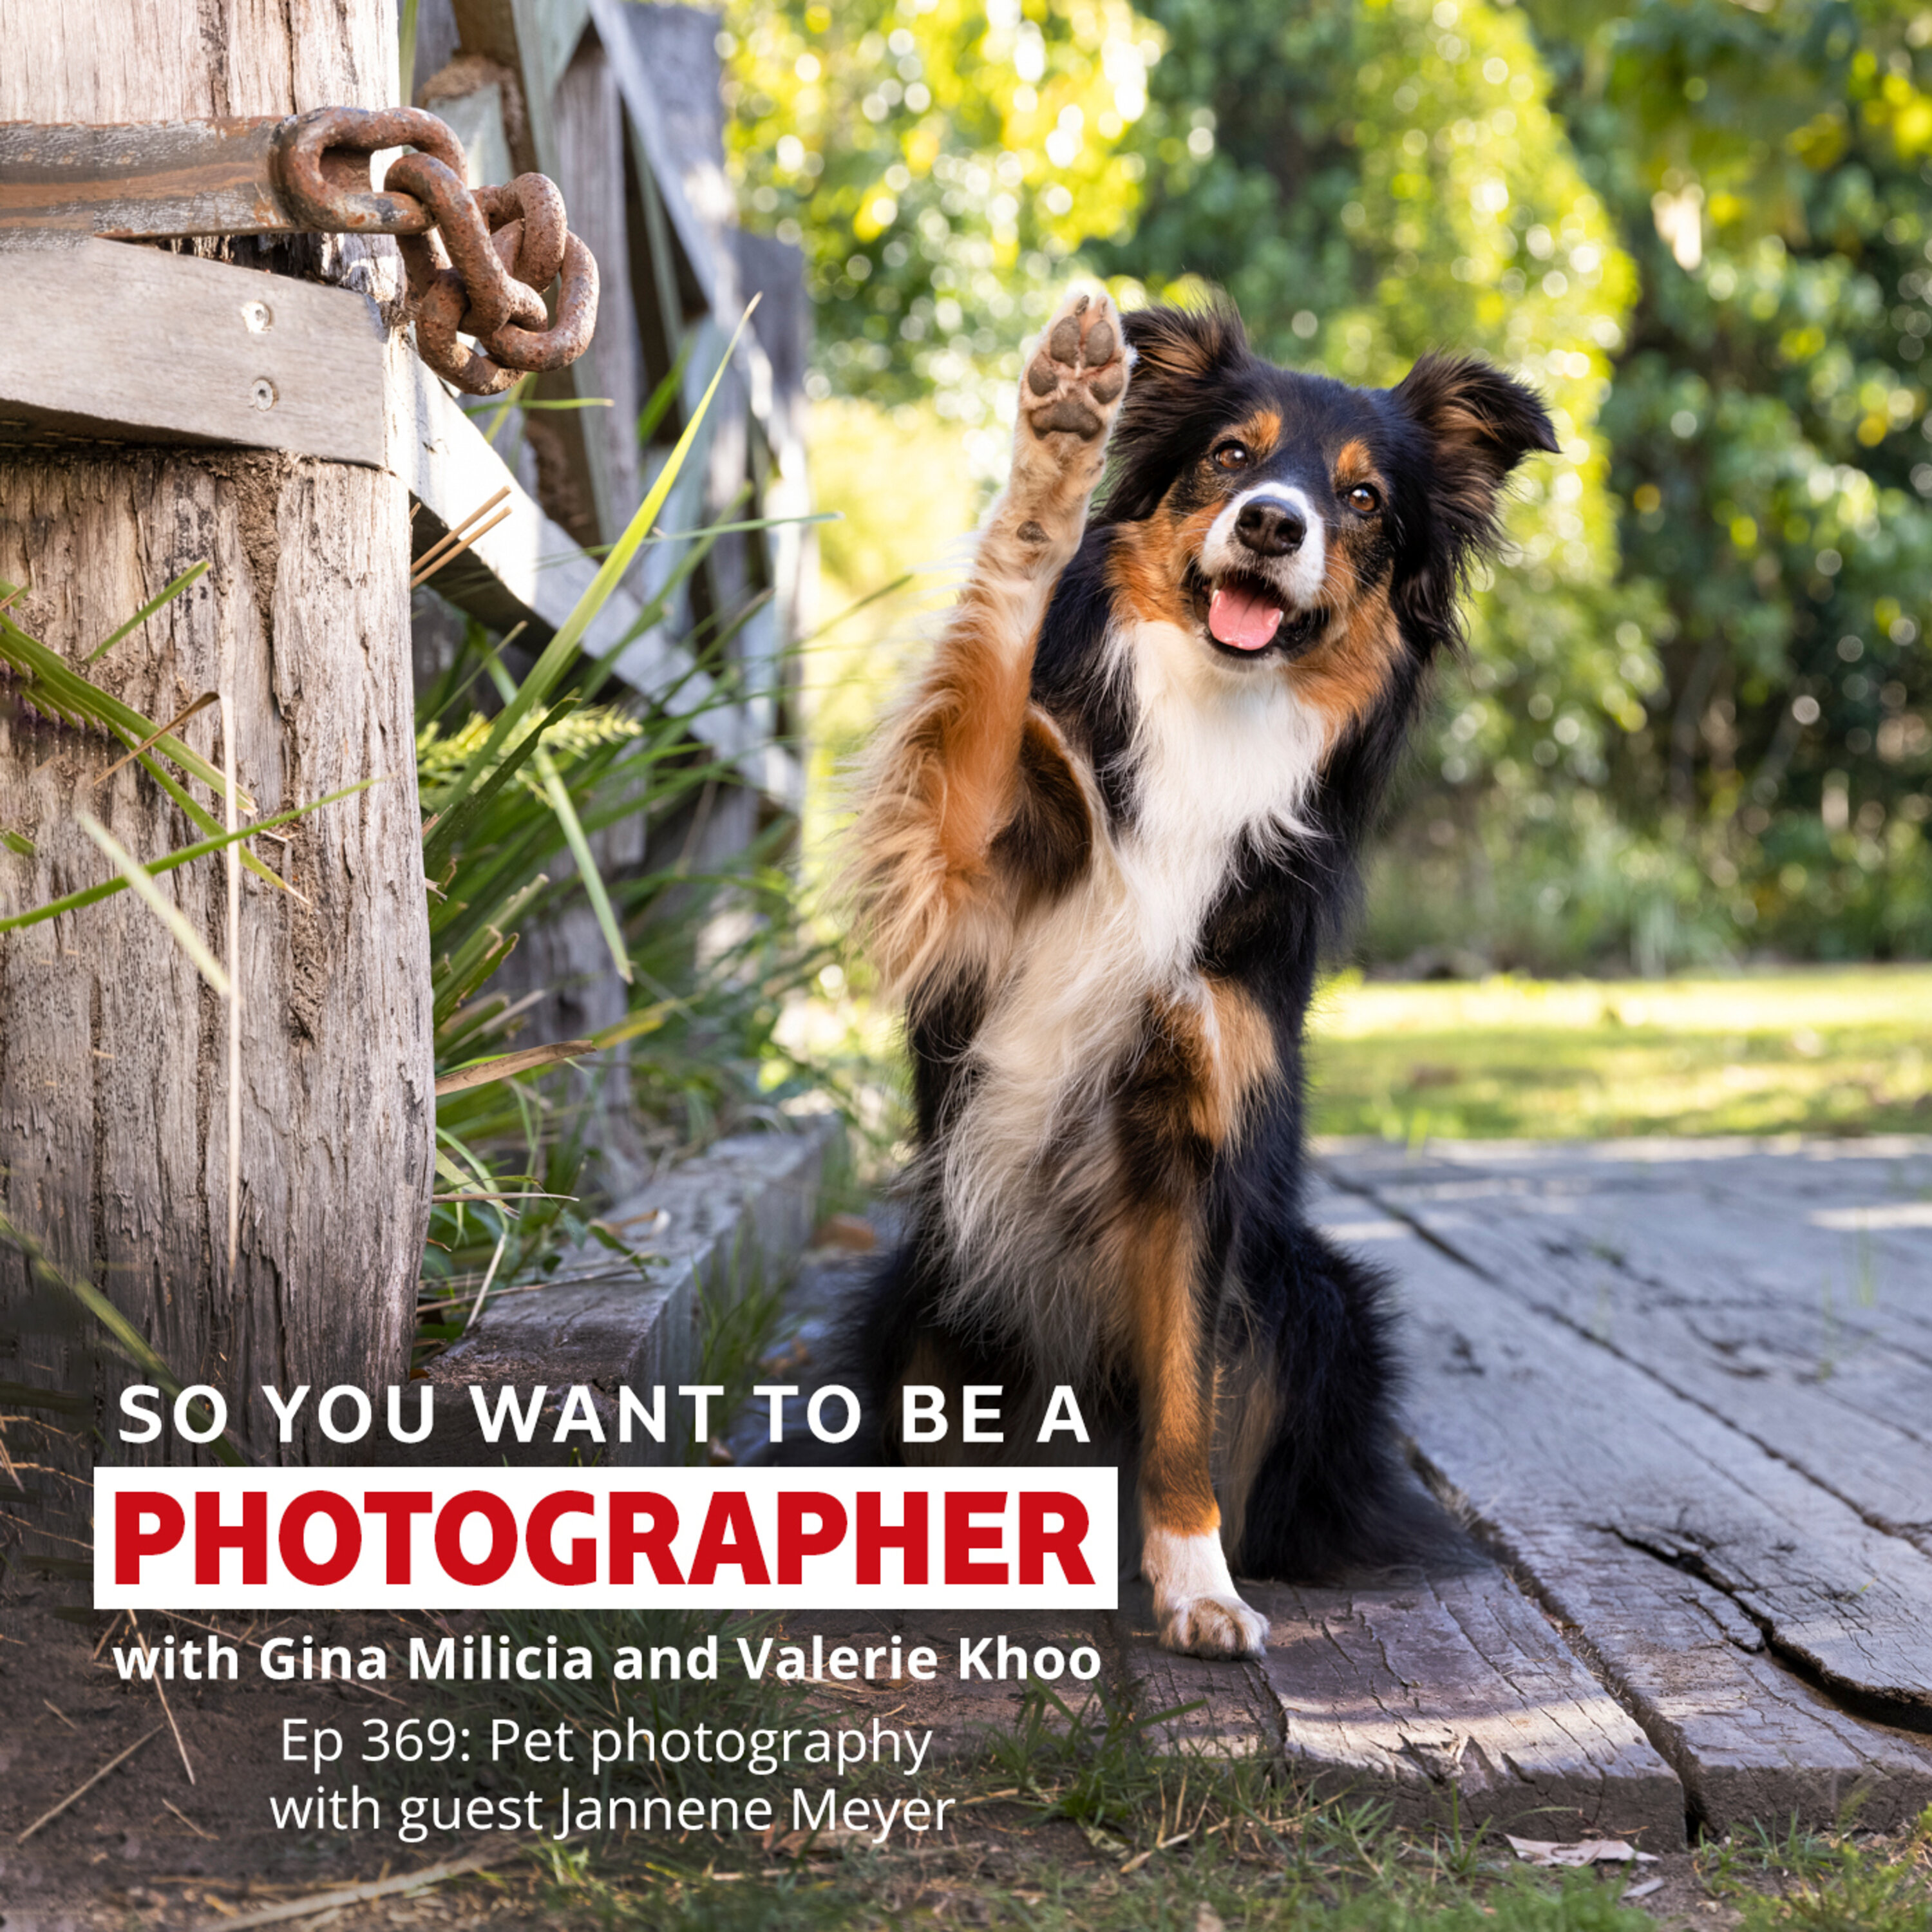 PHOTO 369: Pet photography with guest Jannene Meyer